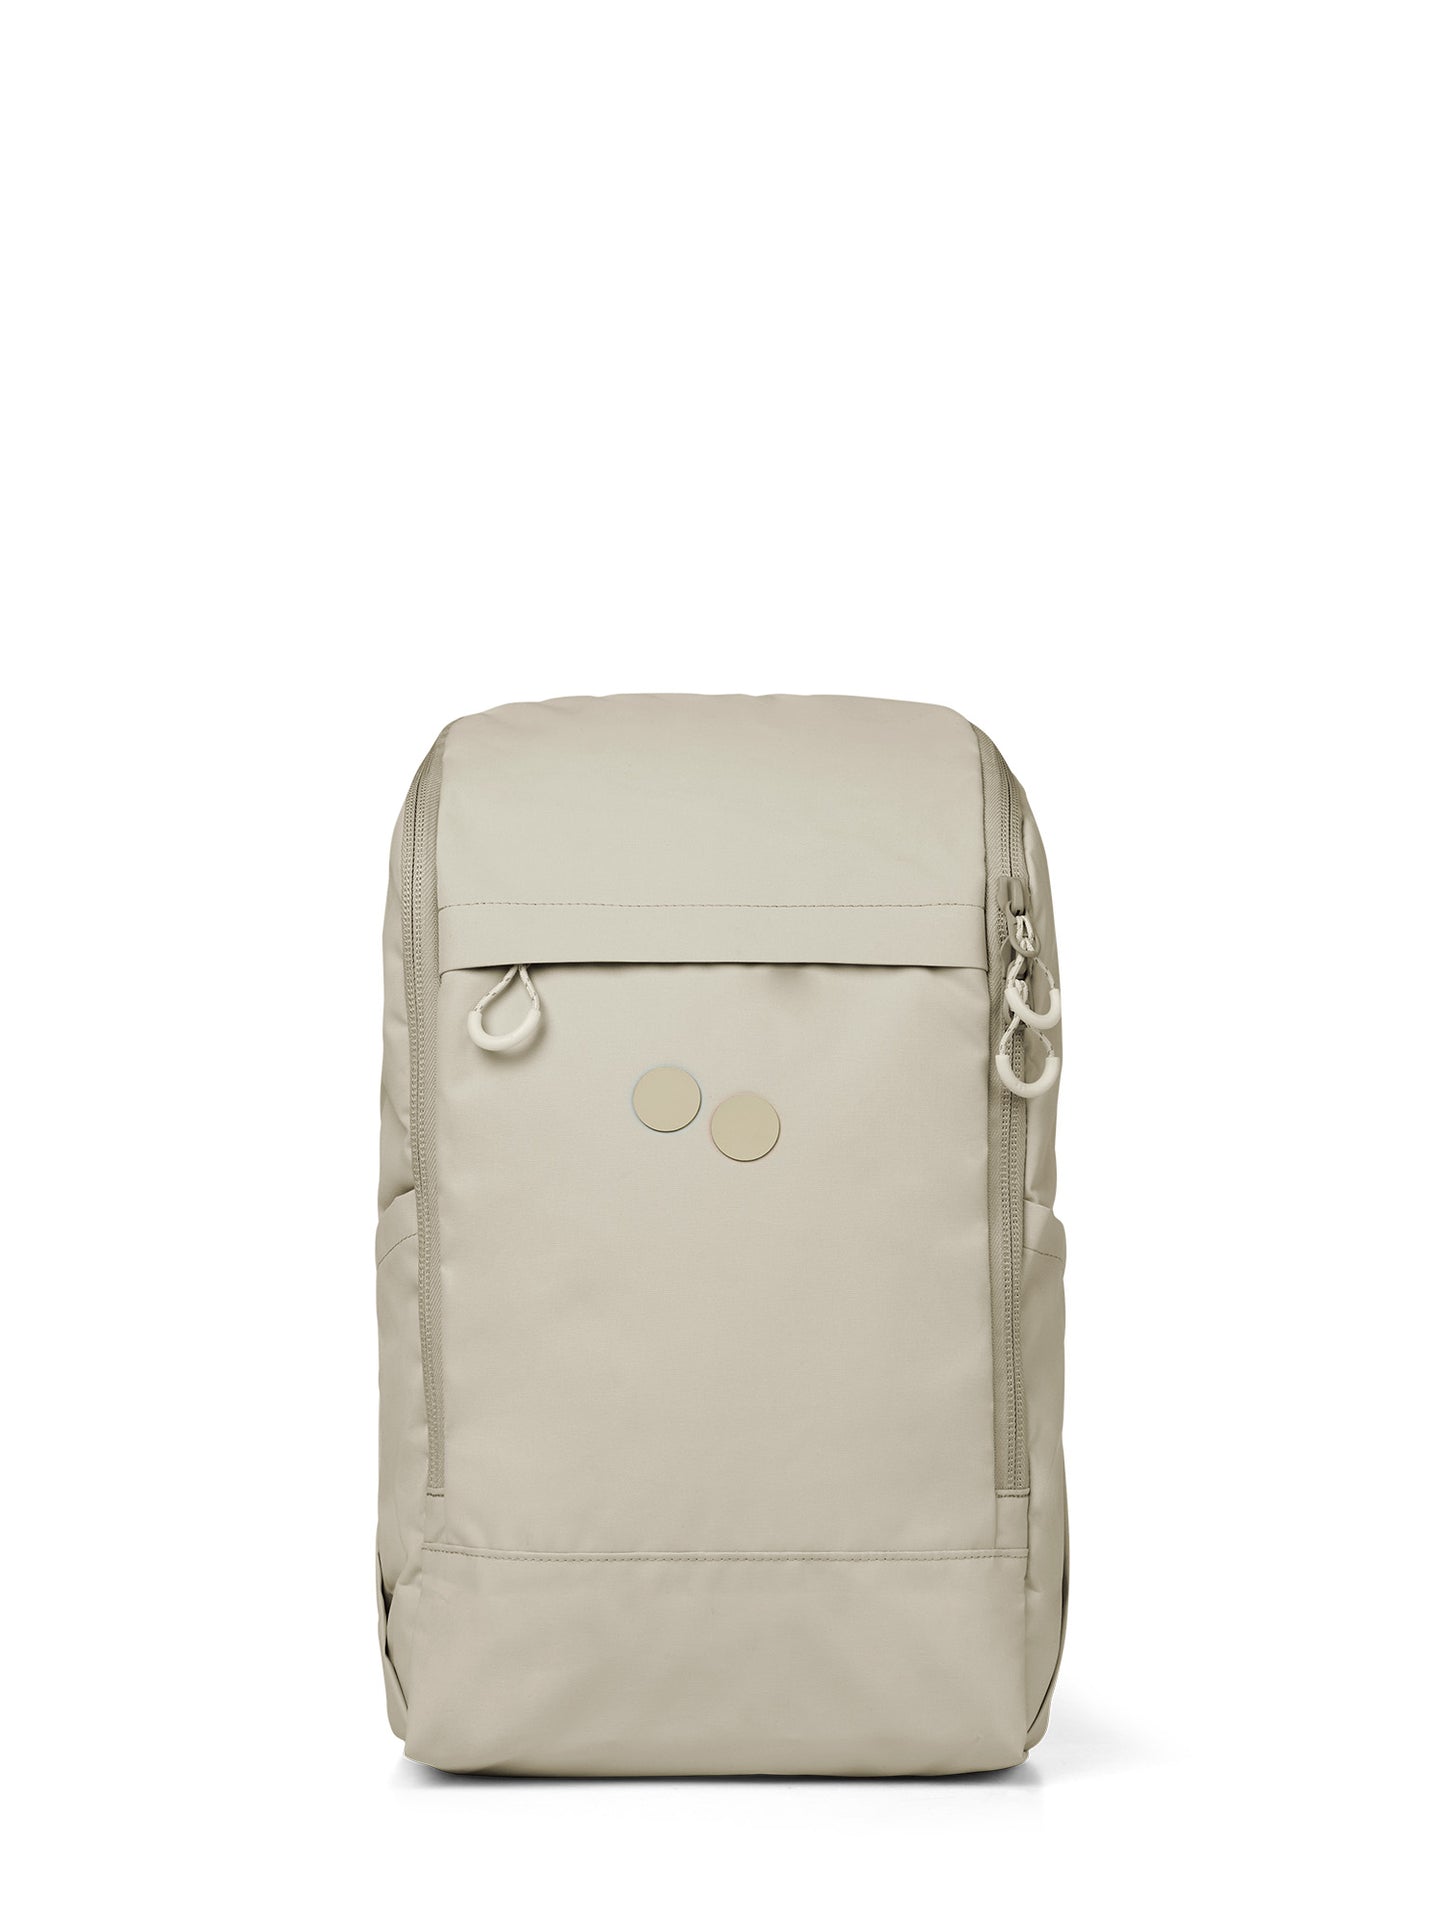 pinqponq-Purik-Reed-Olive-front